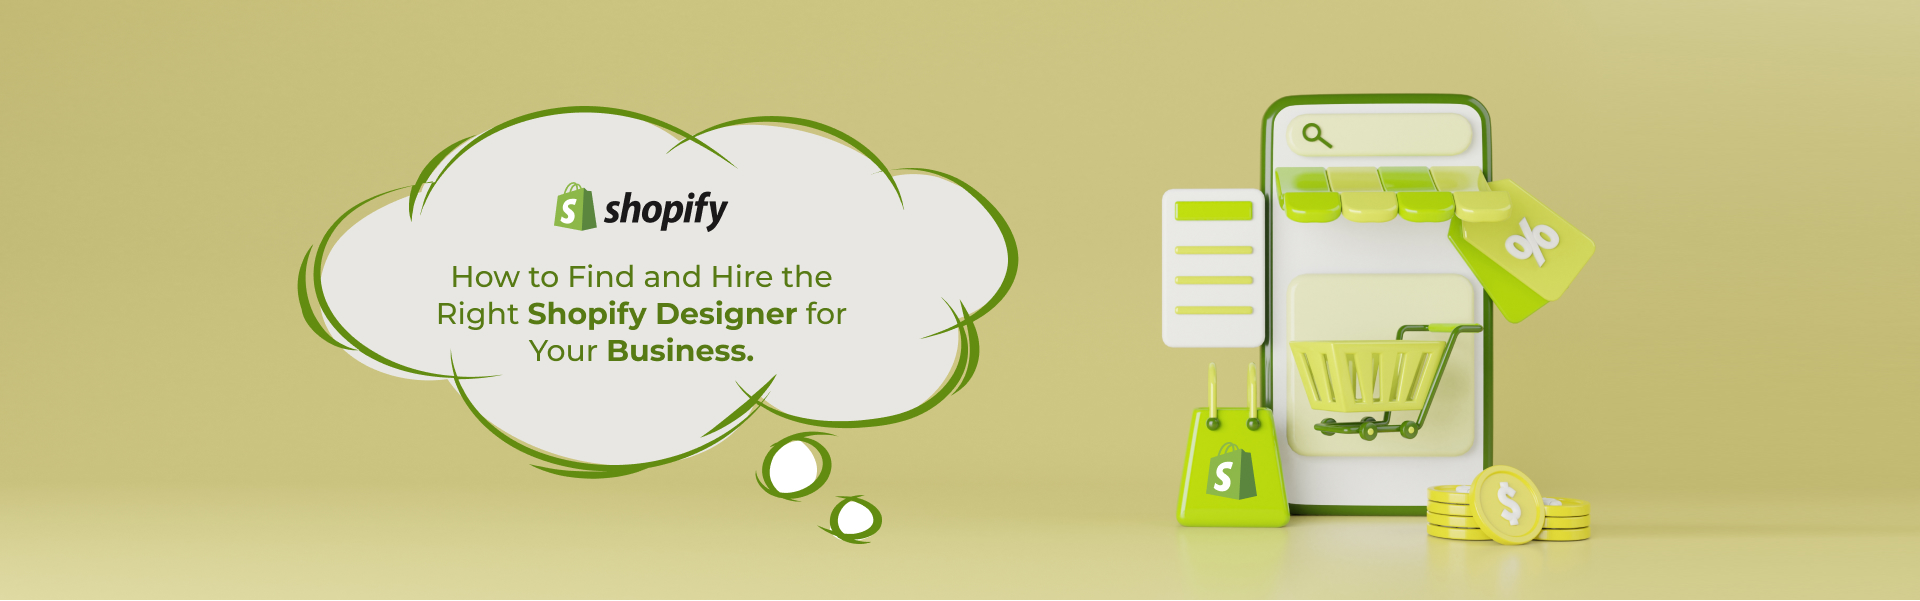 How to Find and Hire the Right Shopify Designer for Your Business